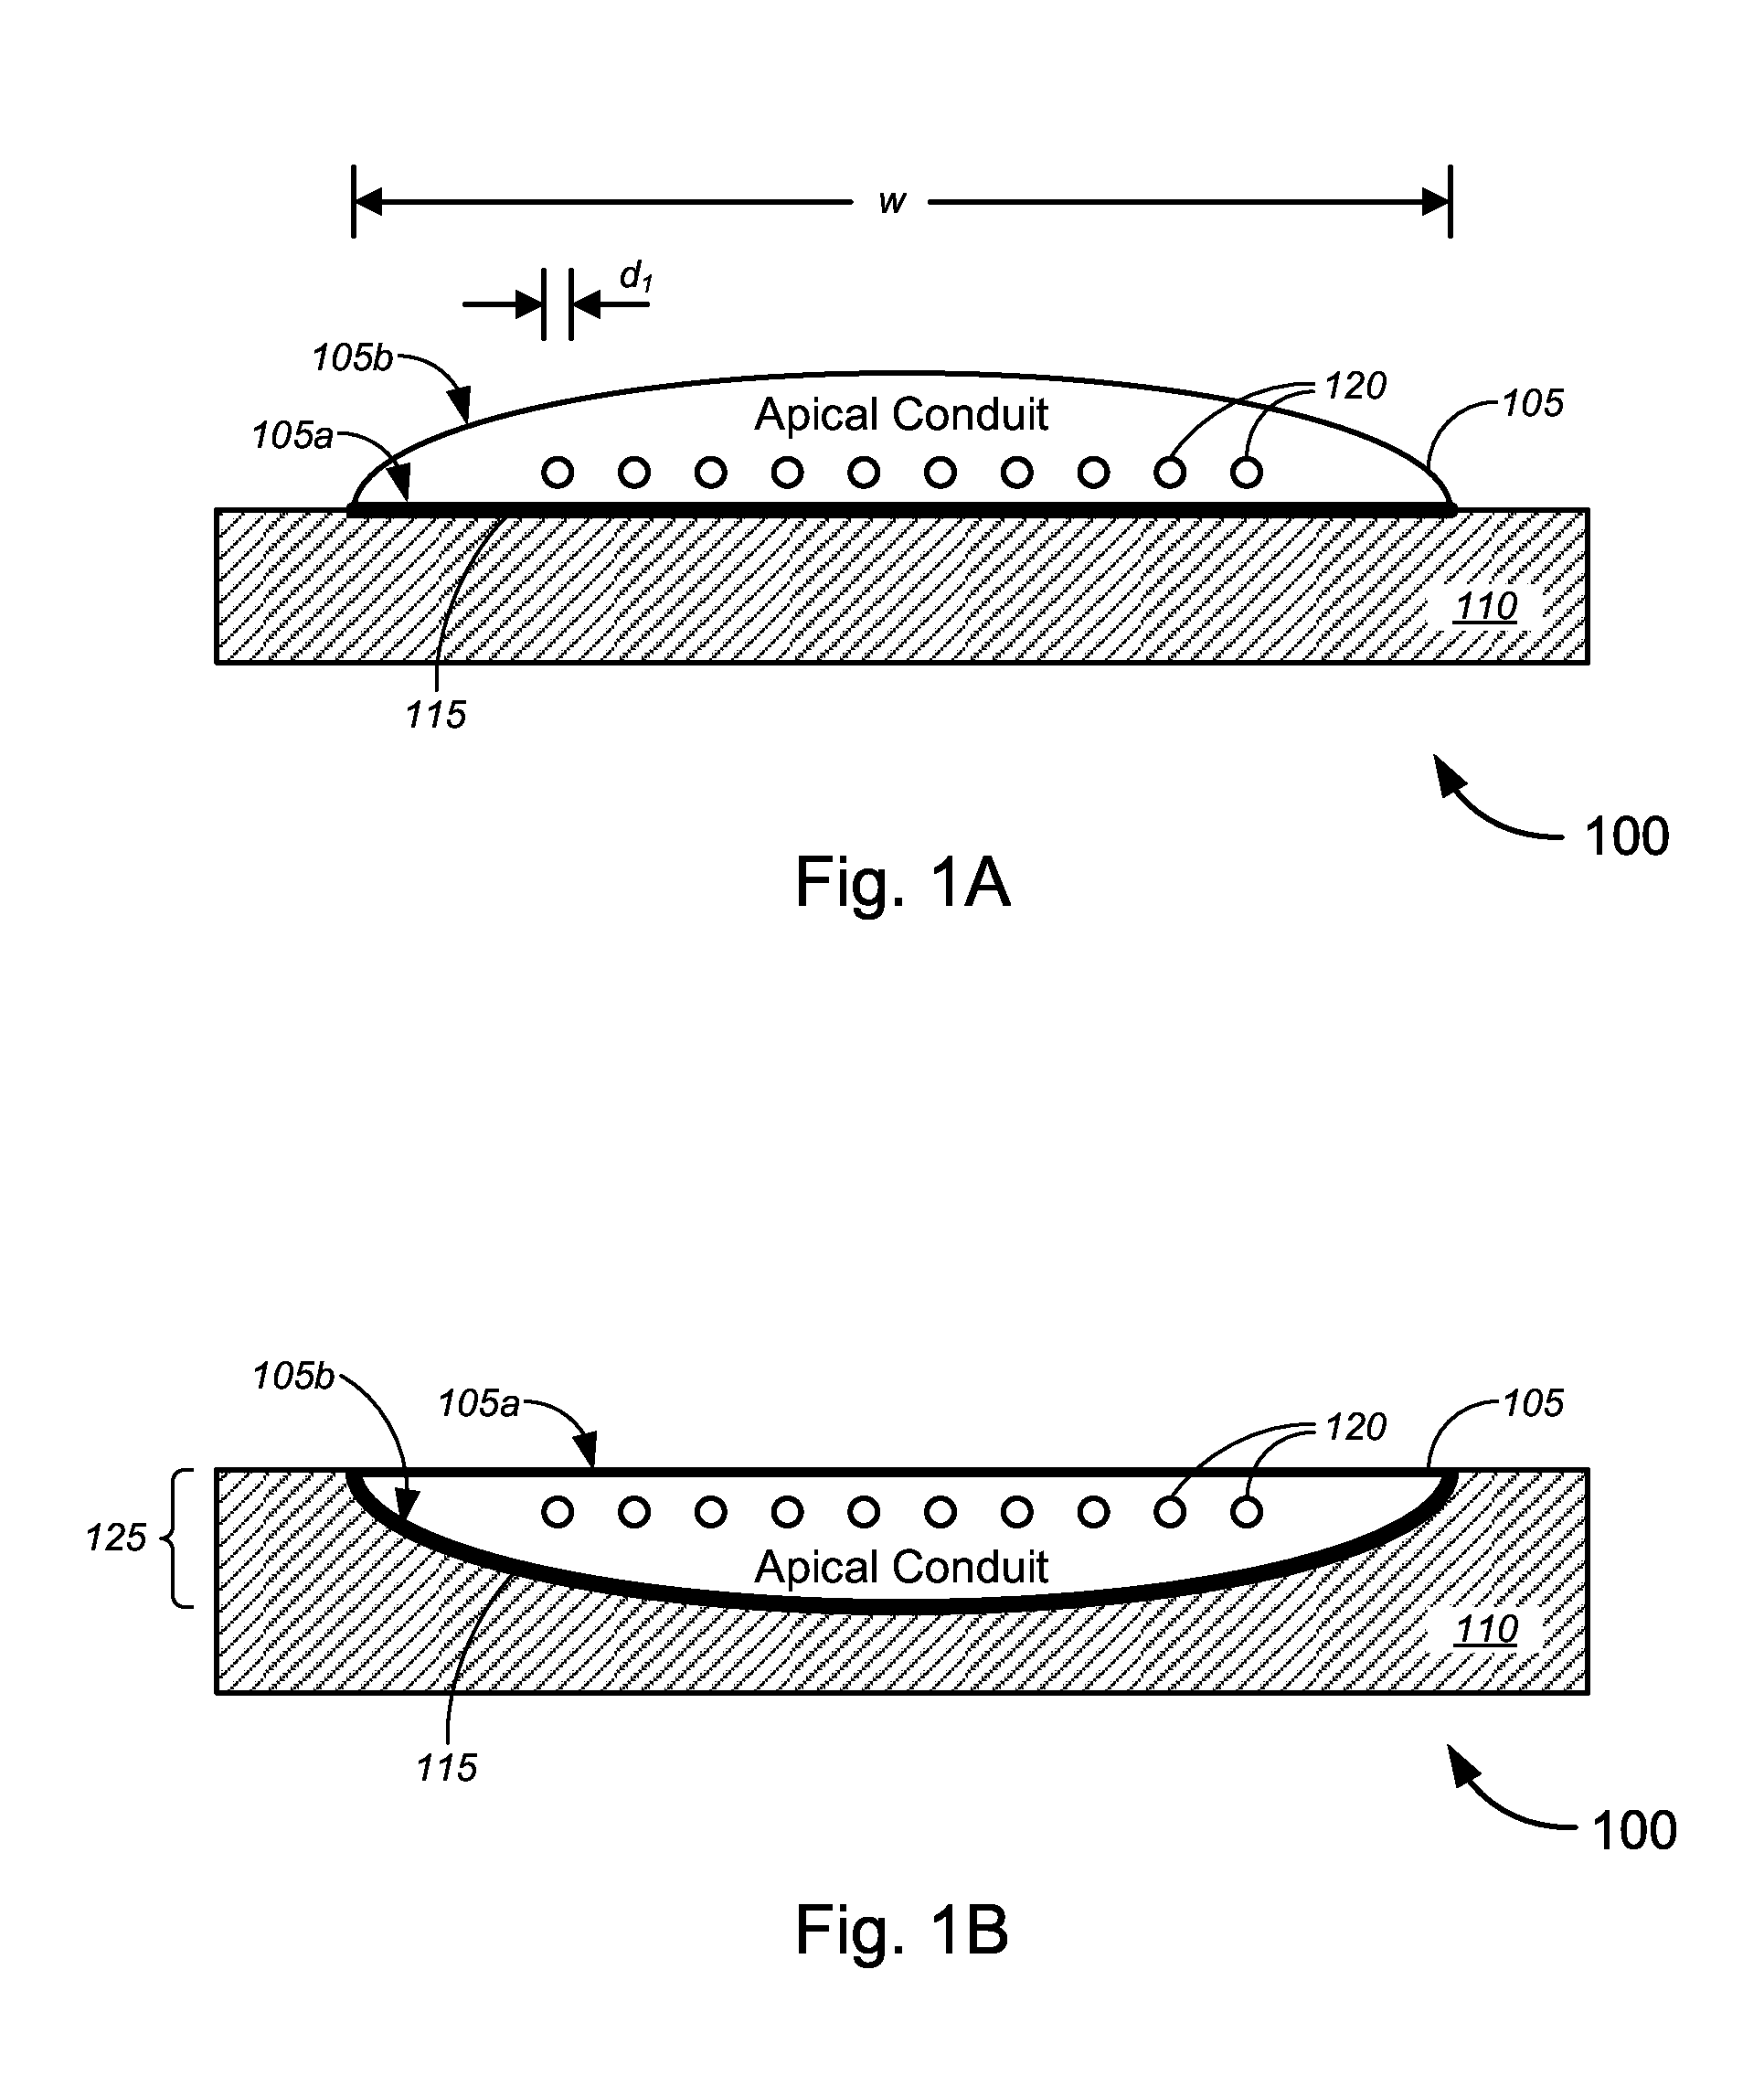 Apical Conduit and Methods of Using Same